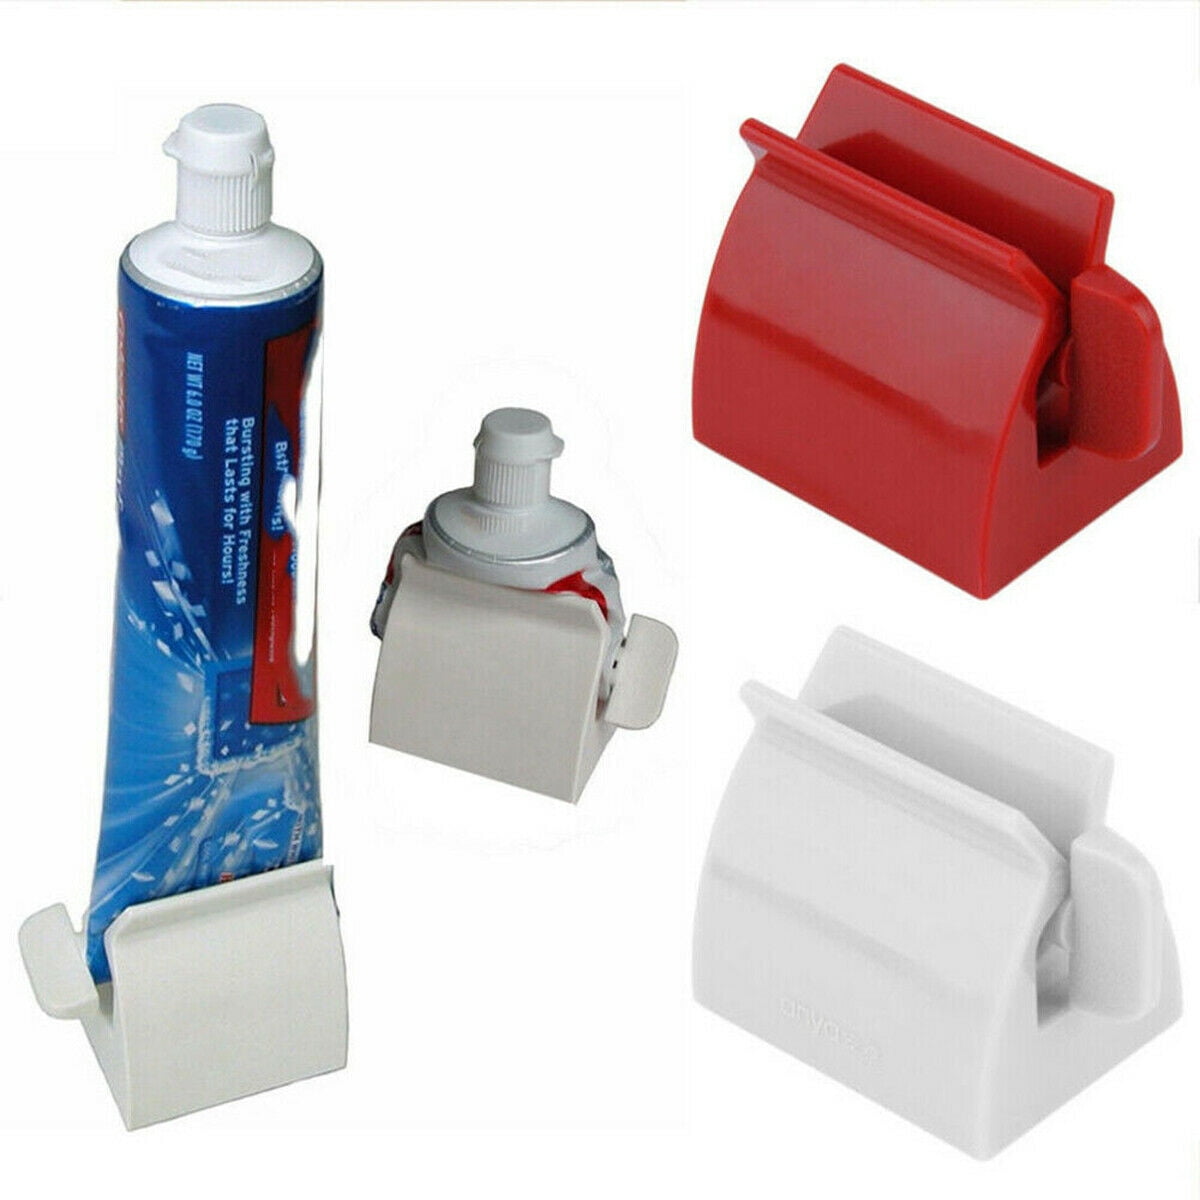 Details about   1 Pcs Toothpaste Squeezer Rolling Tube Easy Dispenser Seat Holder Stand Bathroom 